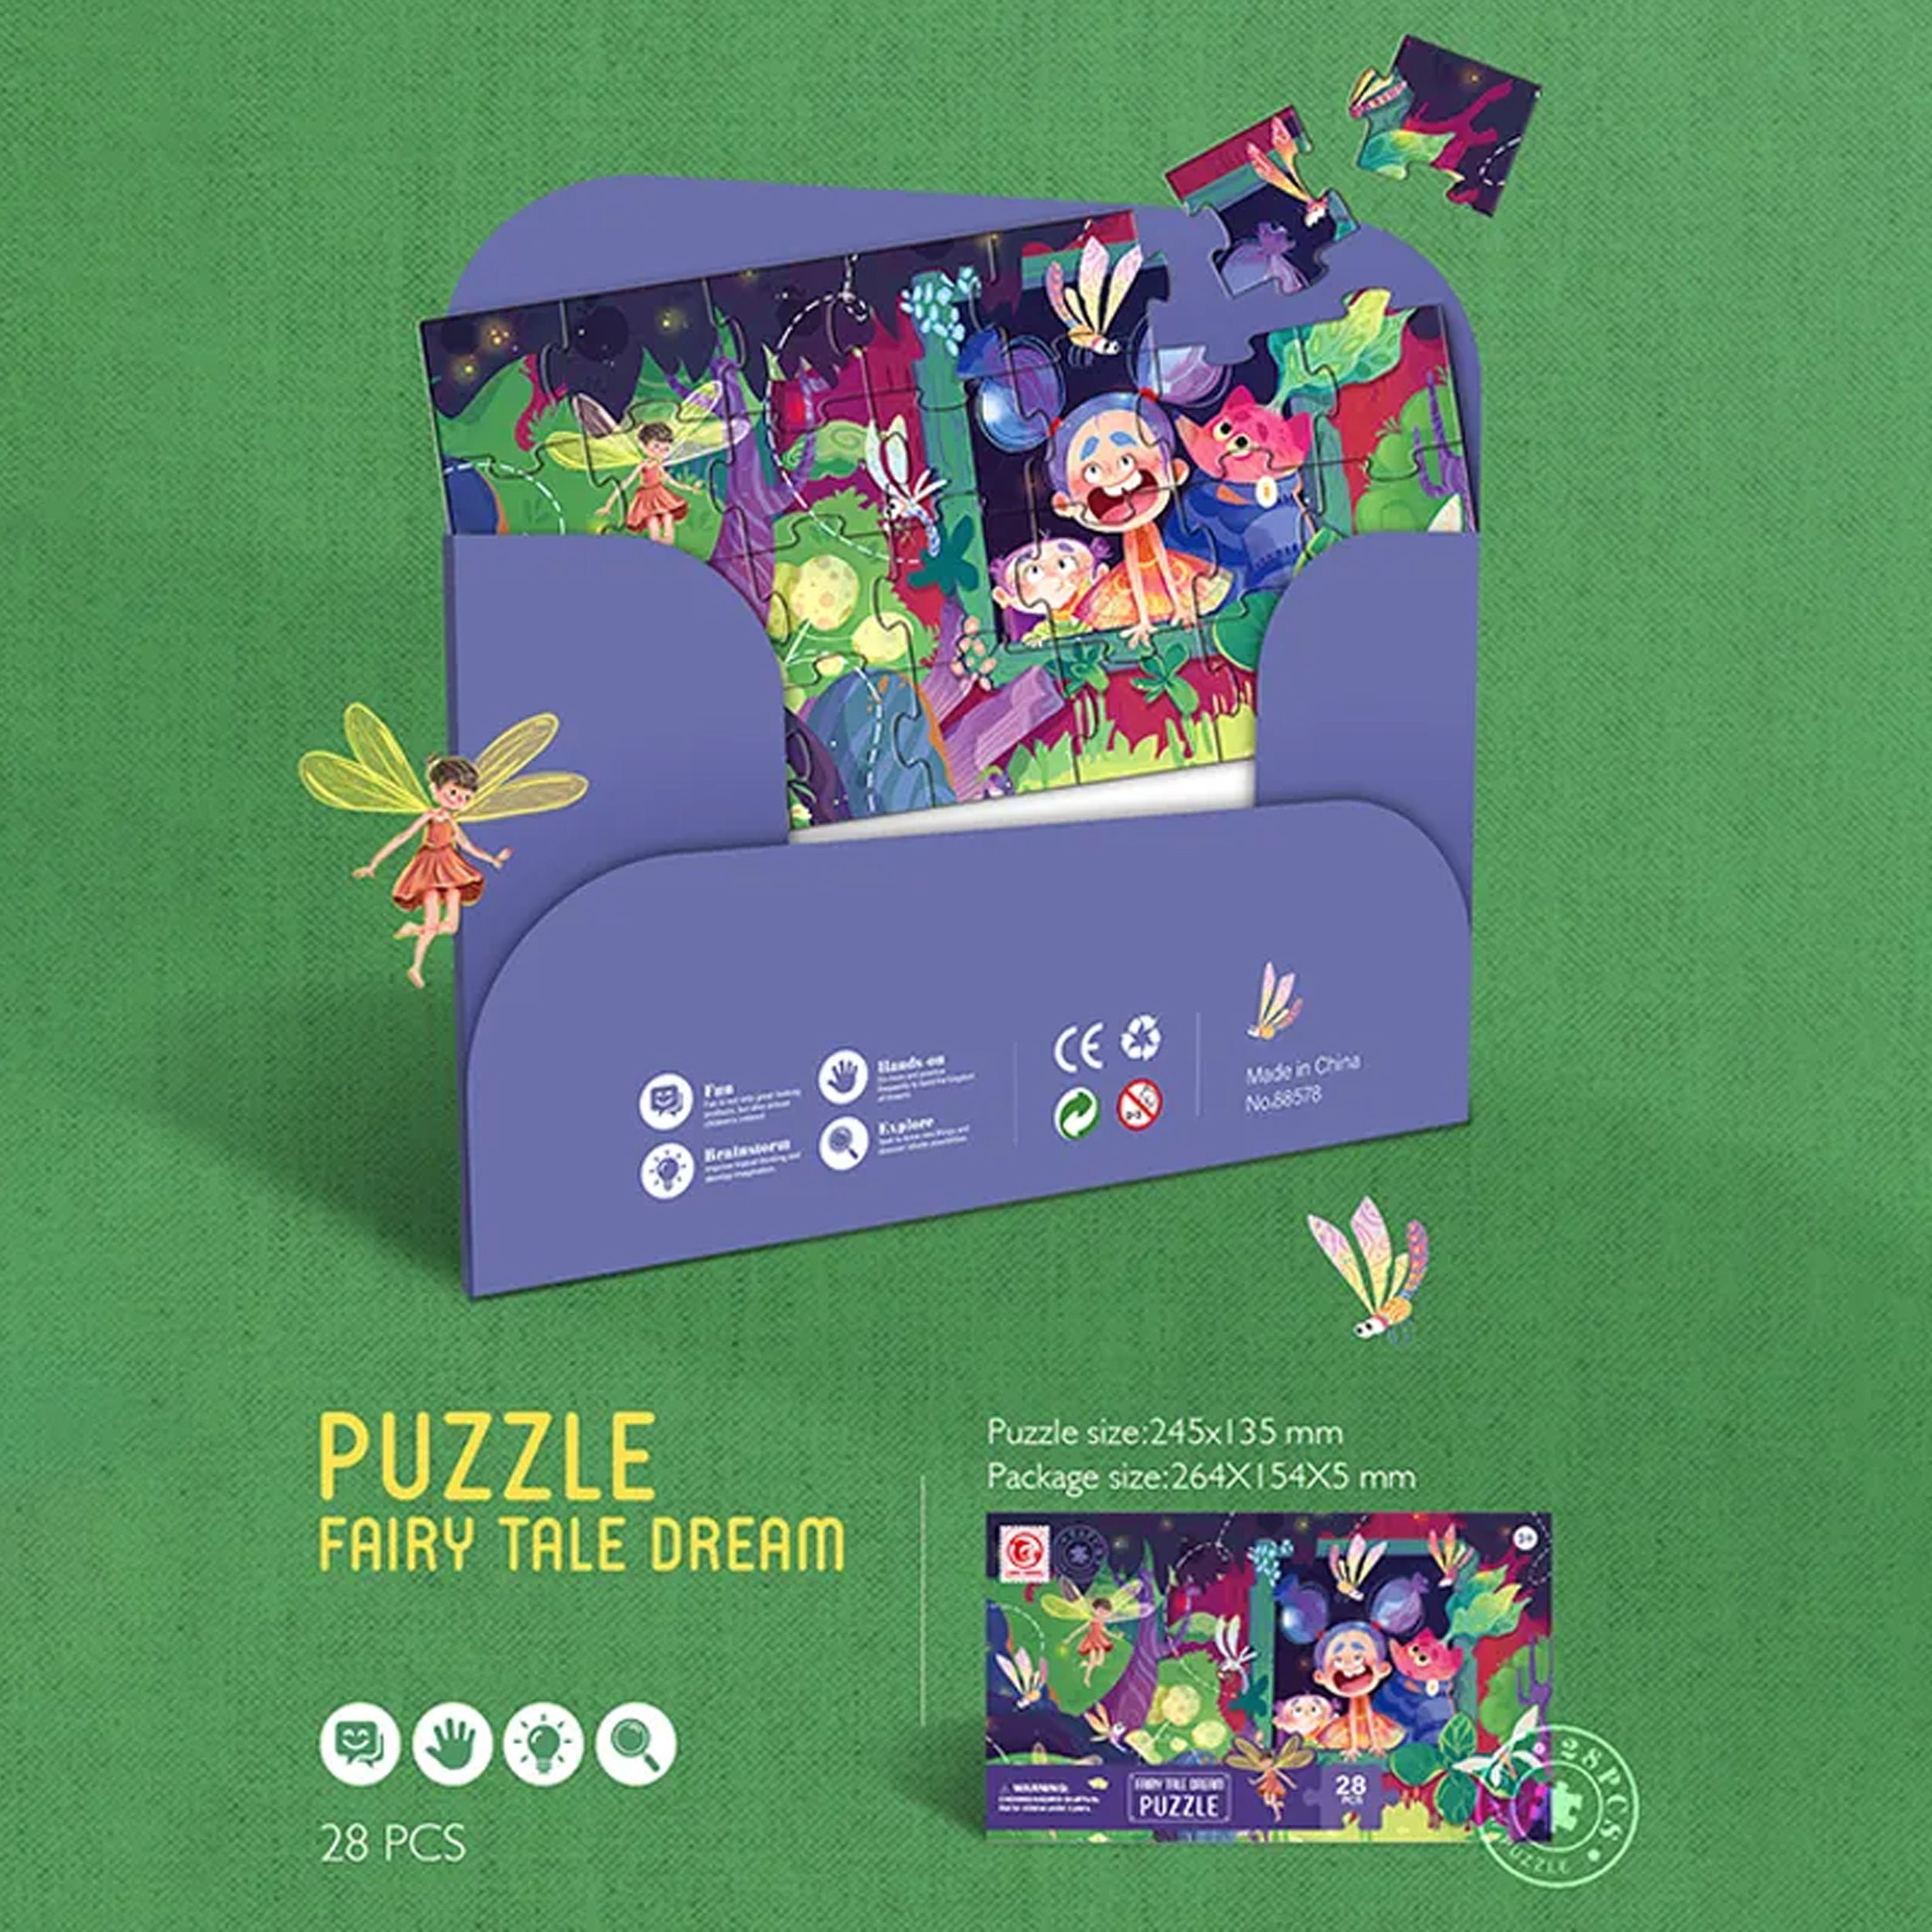 Postcard Educational Puzzle Kids - A Fun and Engaging Way to Learn About Different Countries and Cultures